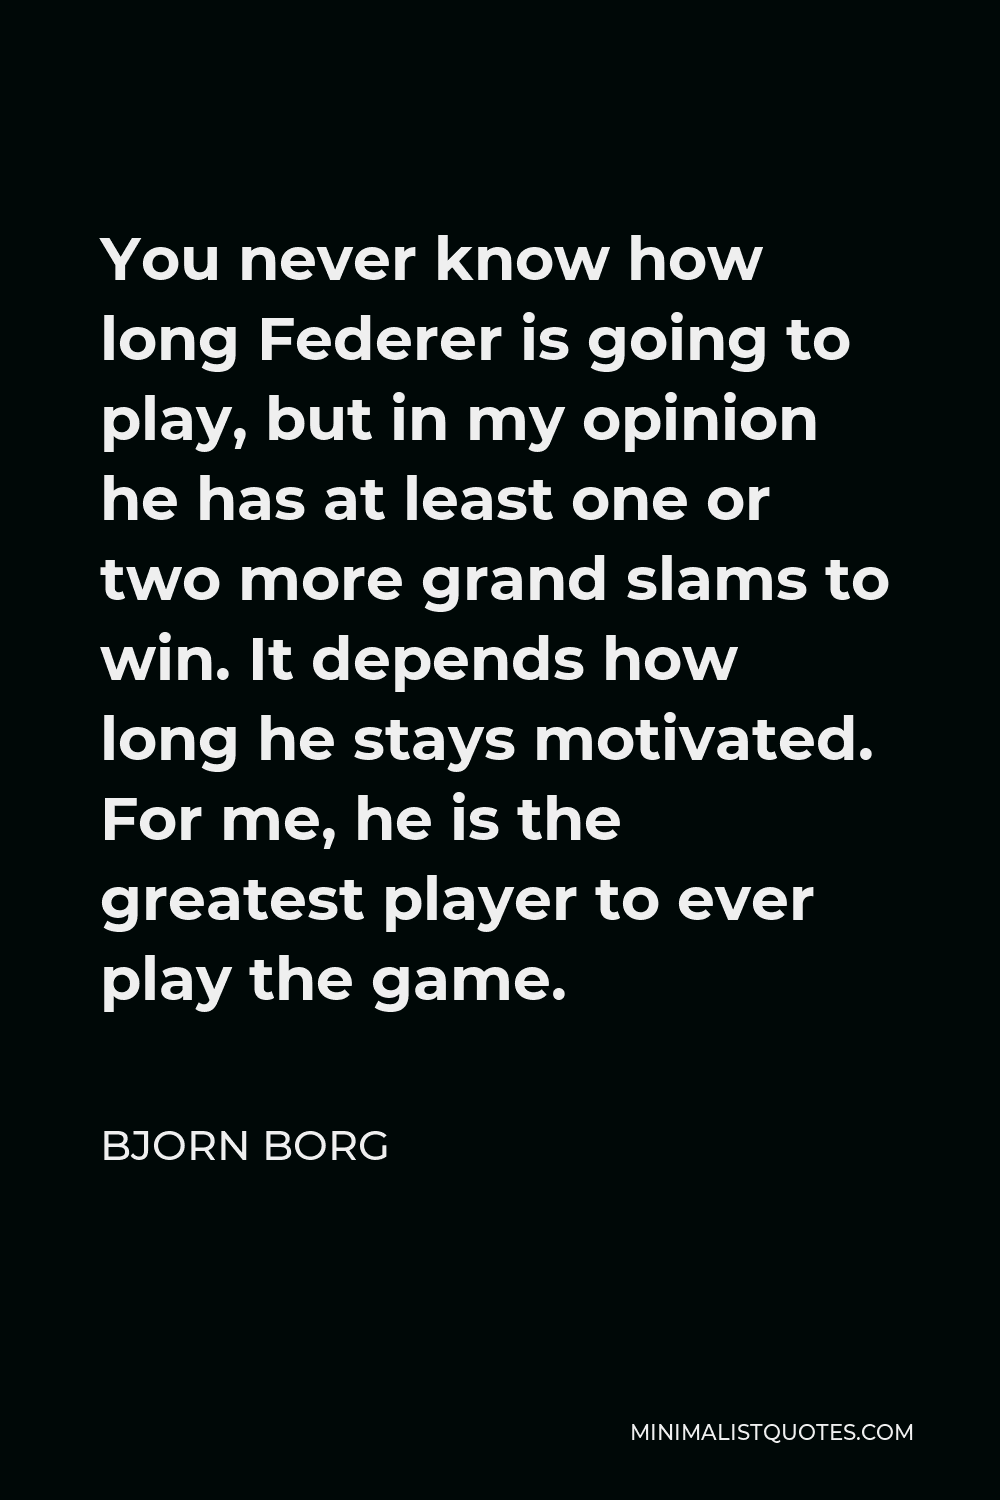 Bjorn Borg Quote - You never know how long Federer is going to play, but in my opinion he has at least one or two more grand slams to win. It depends how long he stays motivated. For me, he is the greatest player to ever play the game.